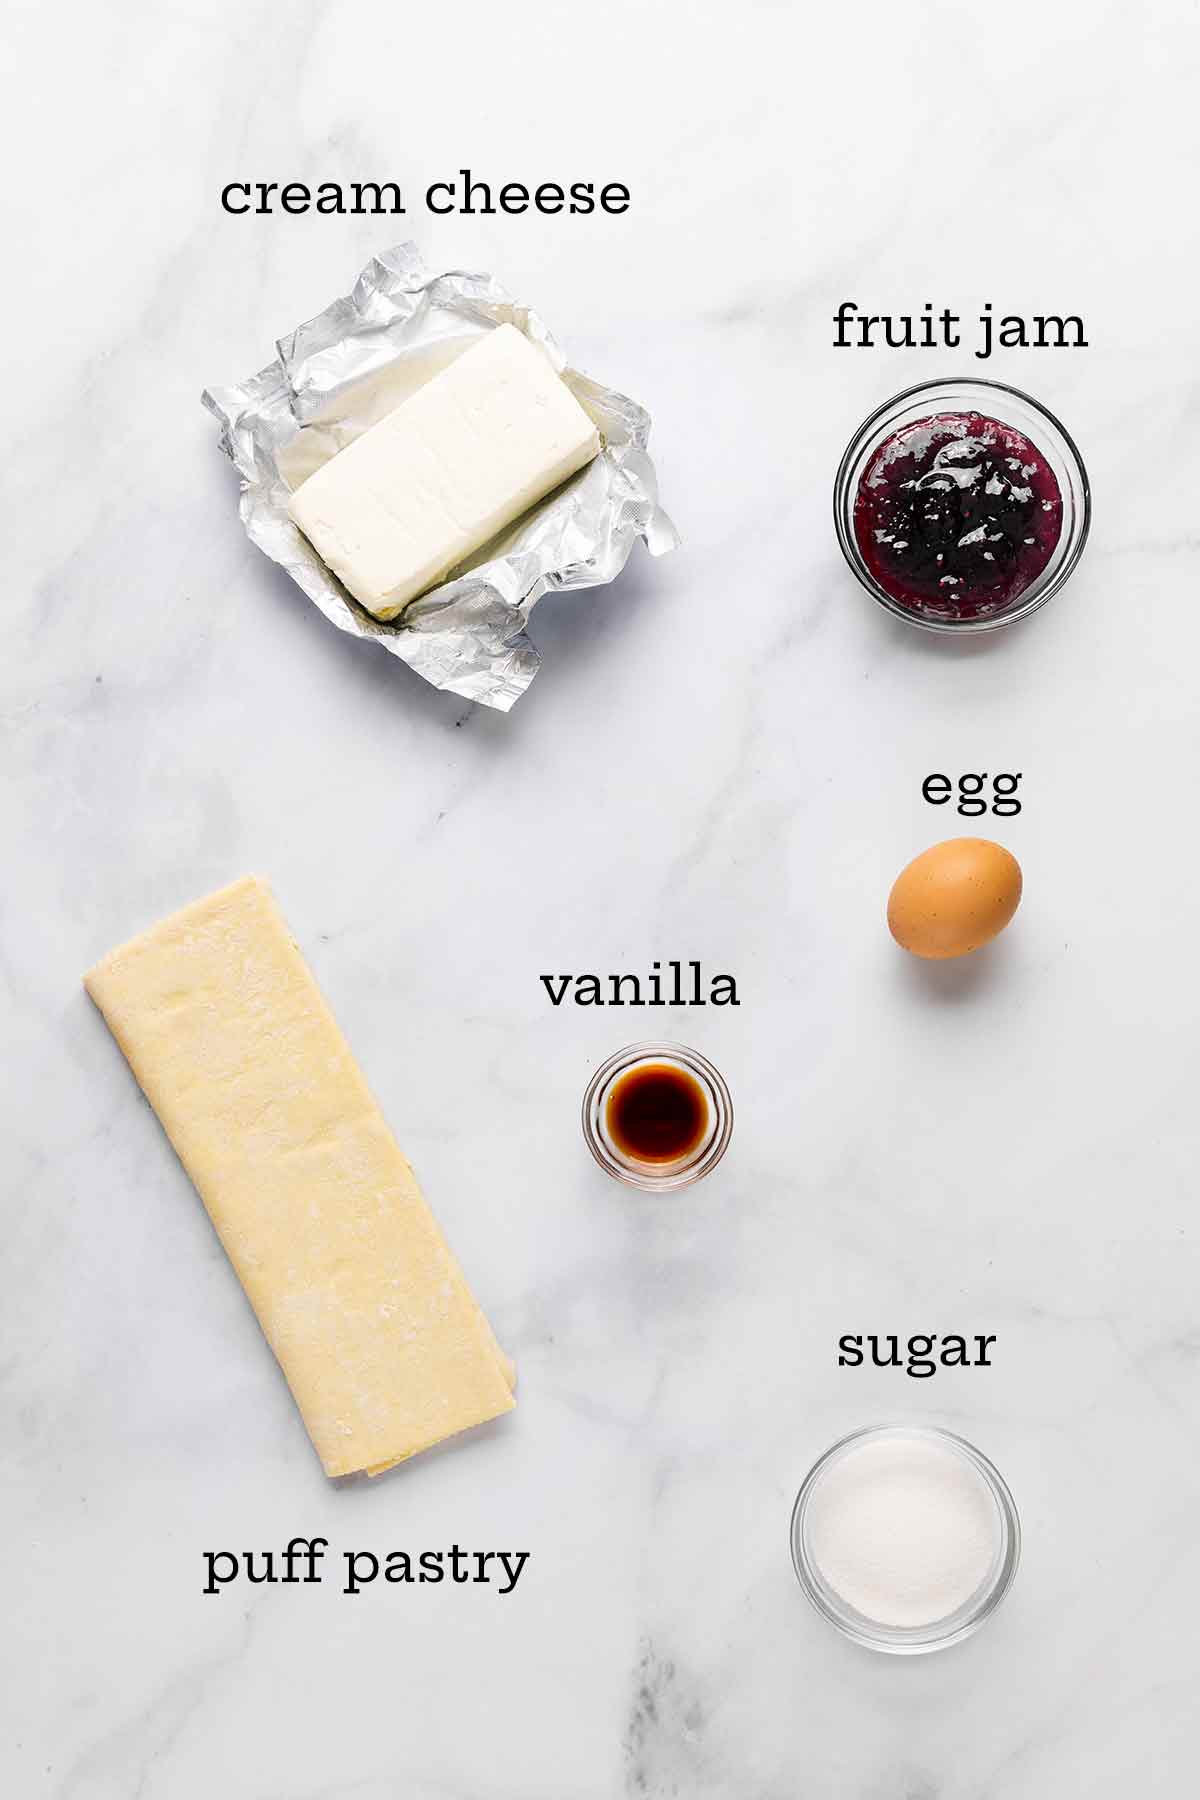 Ingredients for a cheese Danish with fruit filling--cream cheese, puff pastry, vanilla, egg, jam, and sugar.